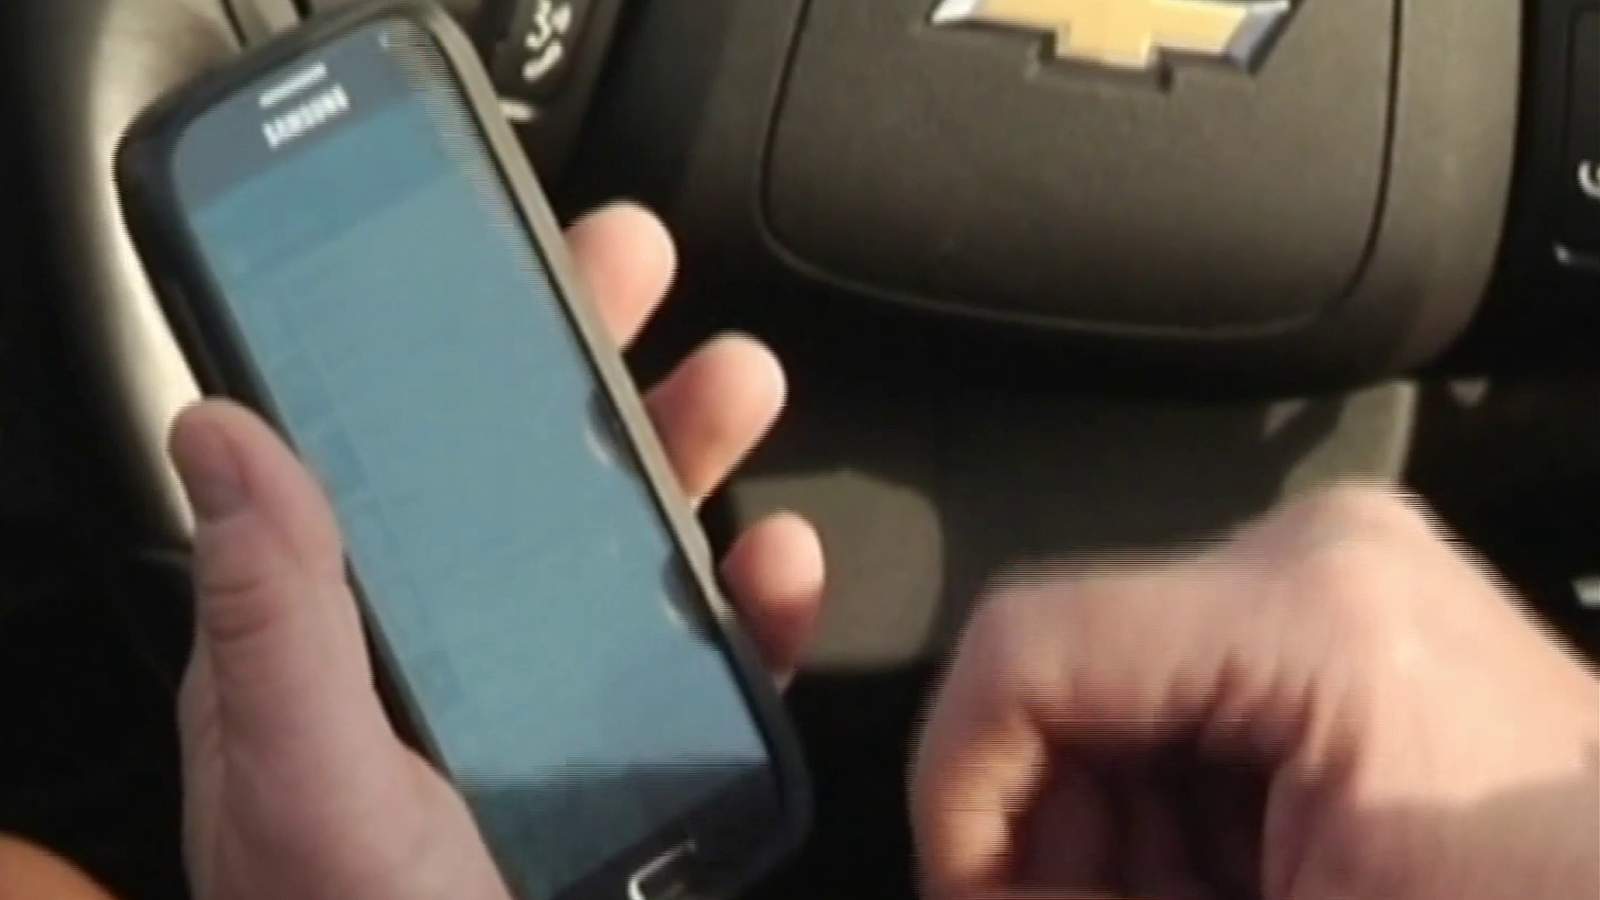 Virginia drivers to be penalized for using phone while driving starting 2021